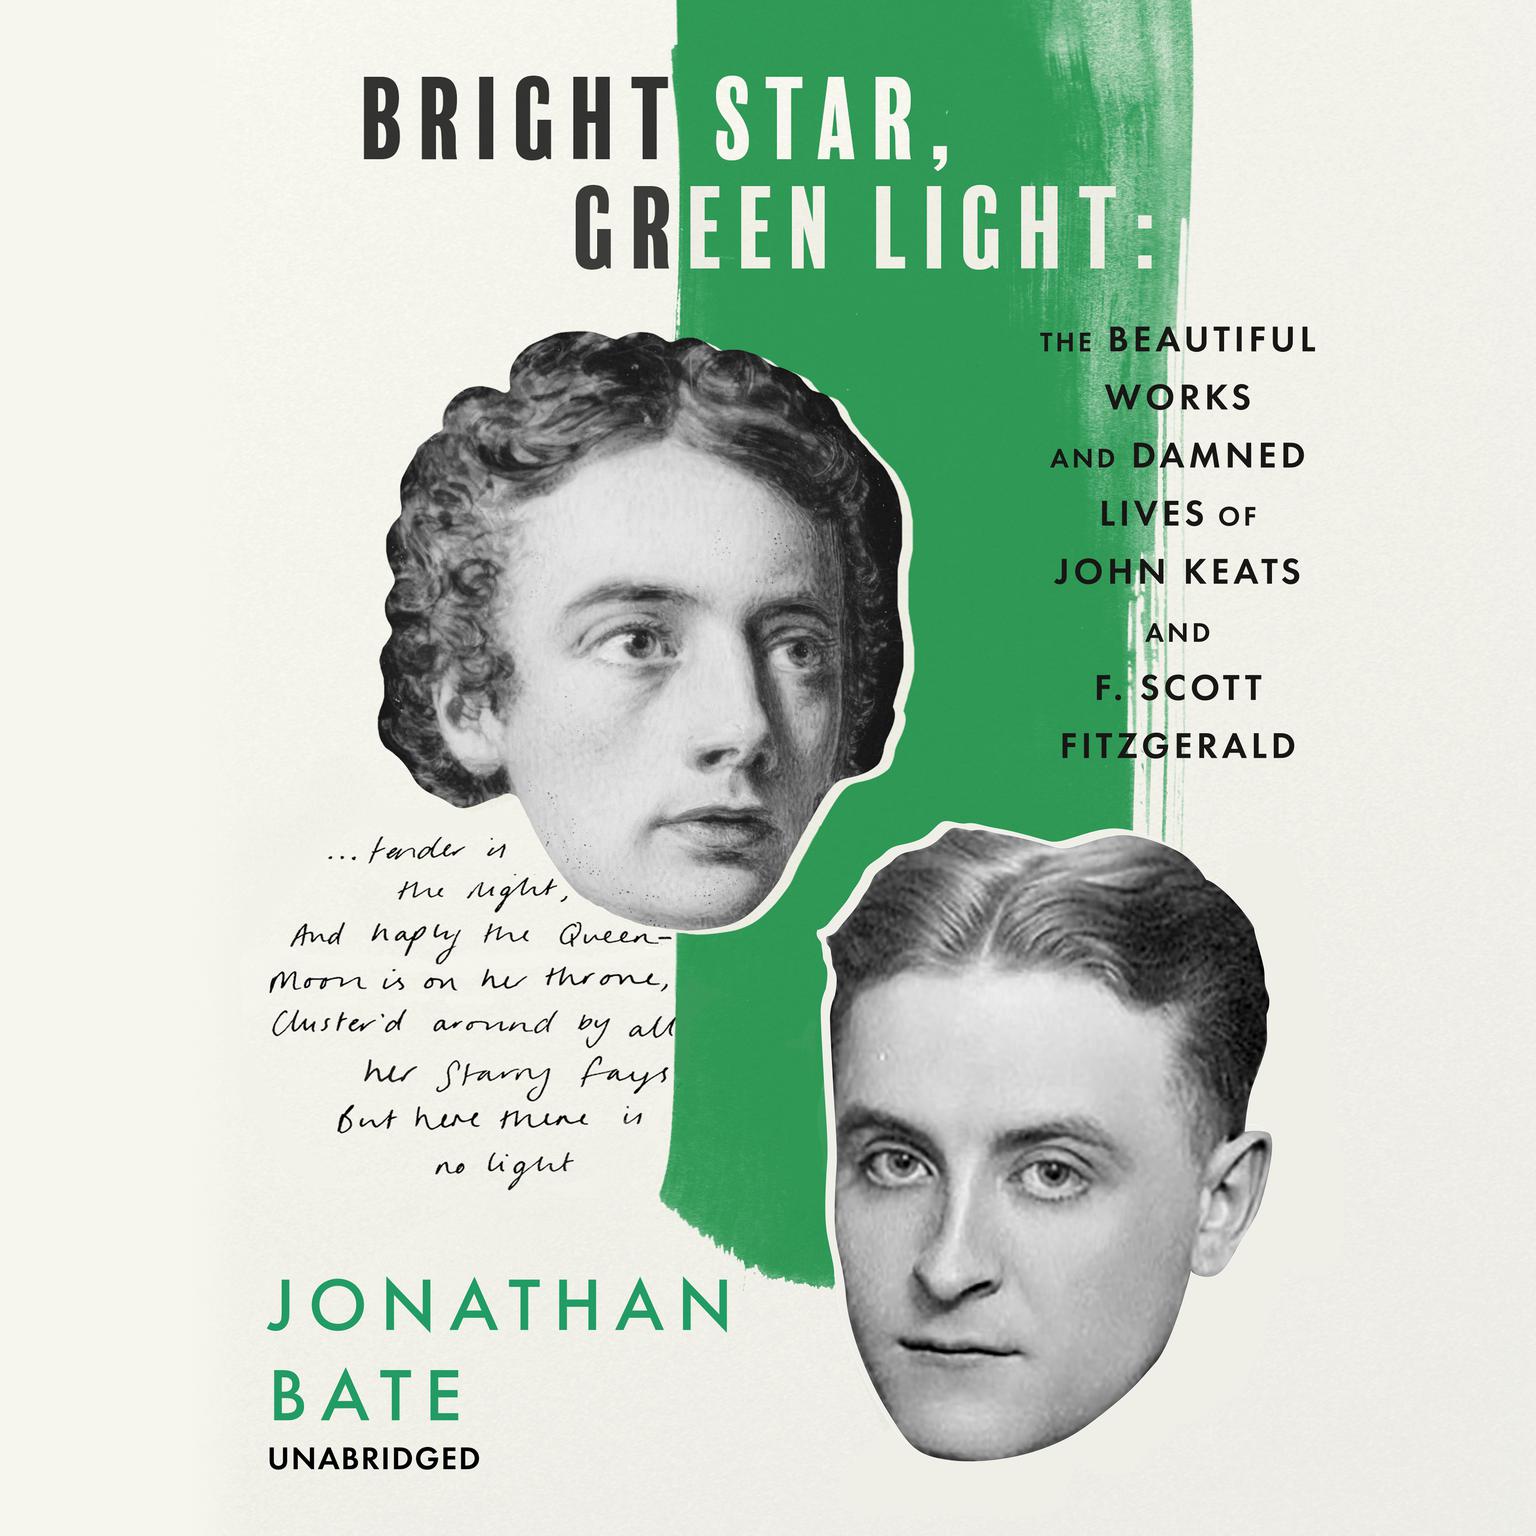 Bright Star, Green Light: The Beautiful Works and Damned Lives of John Keats and F. Scott Fitzgerald Audiobook, by Jonathan Bate